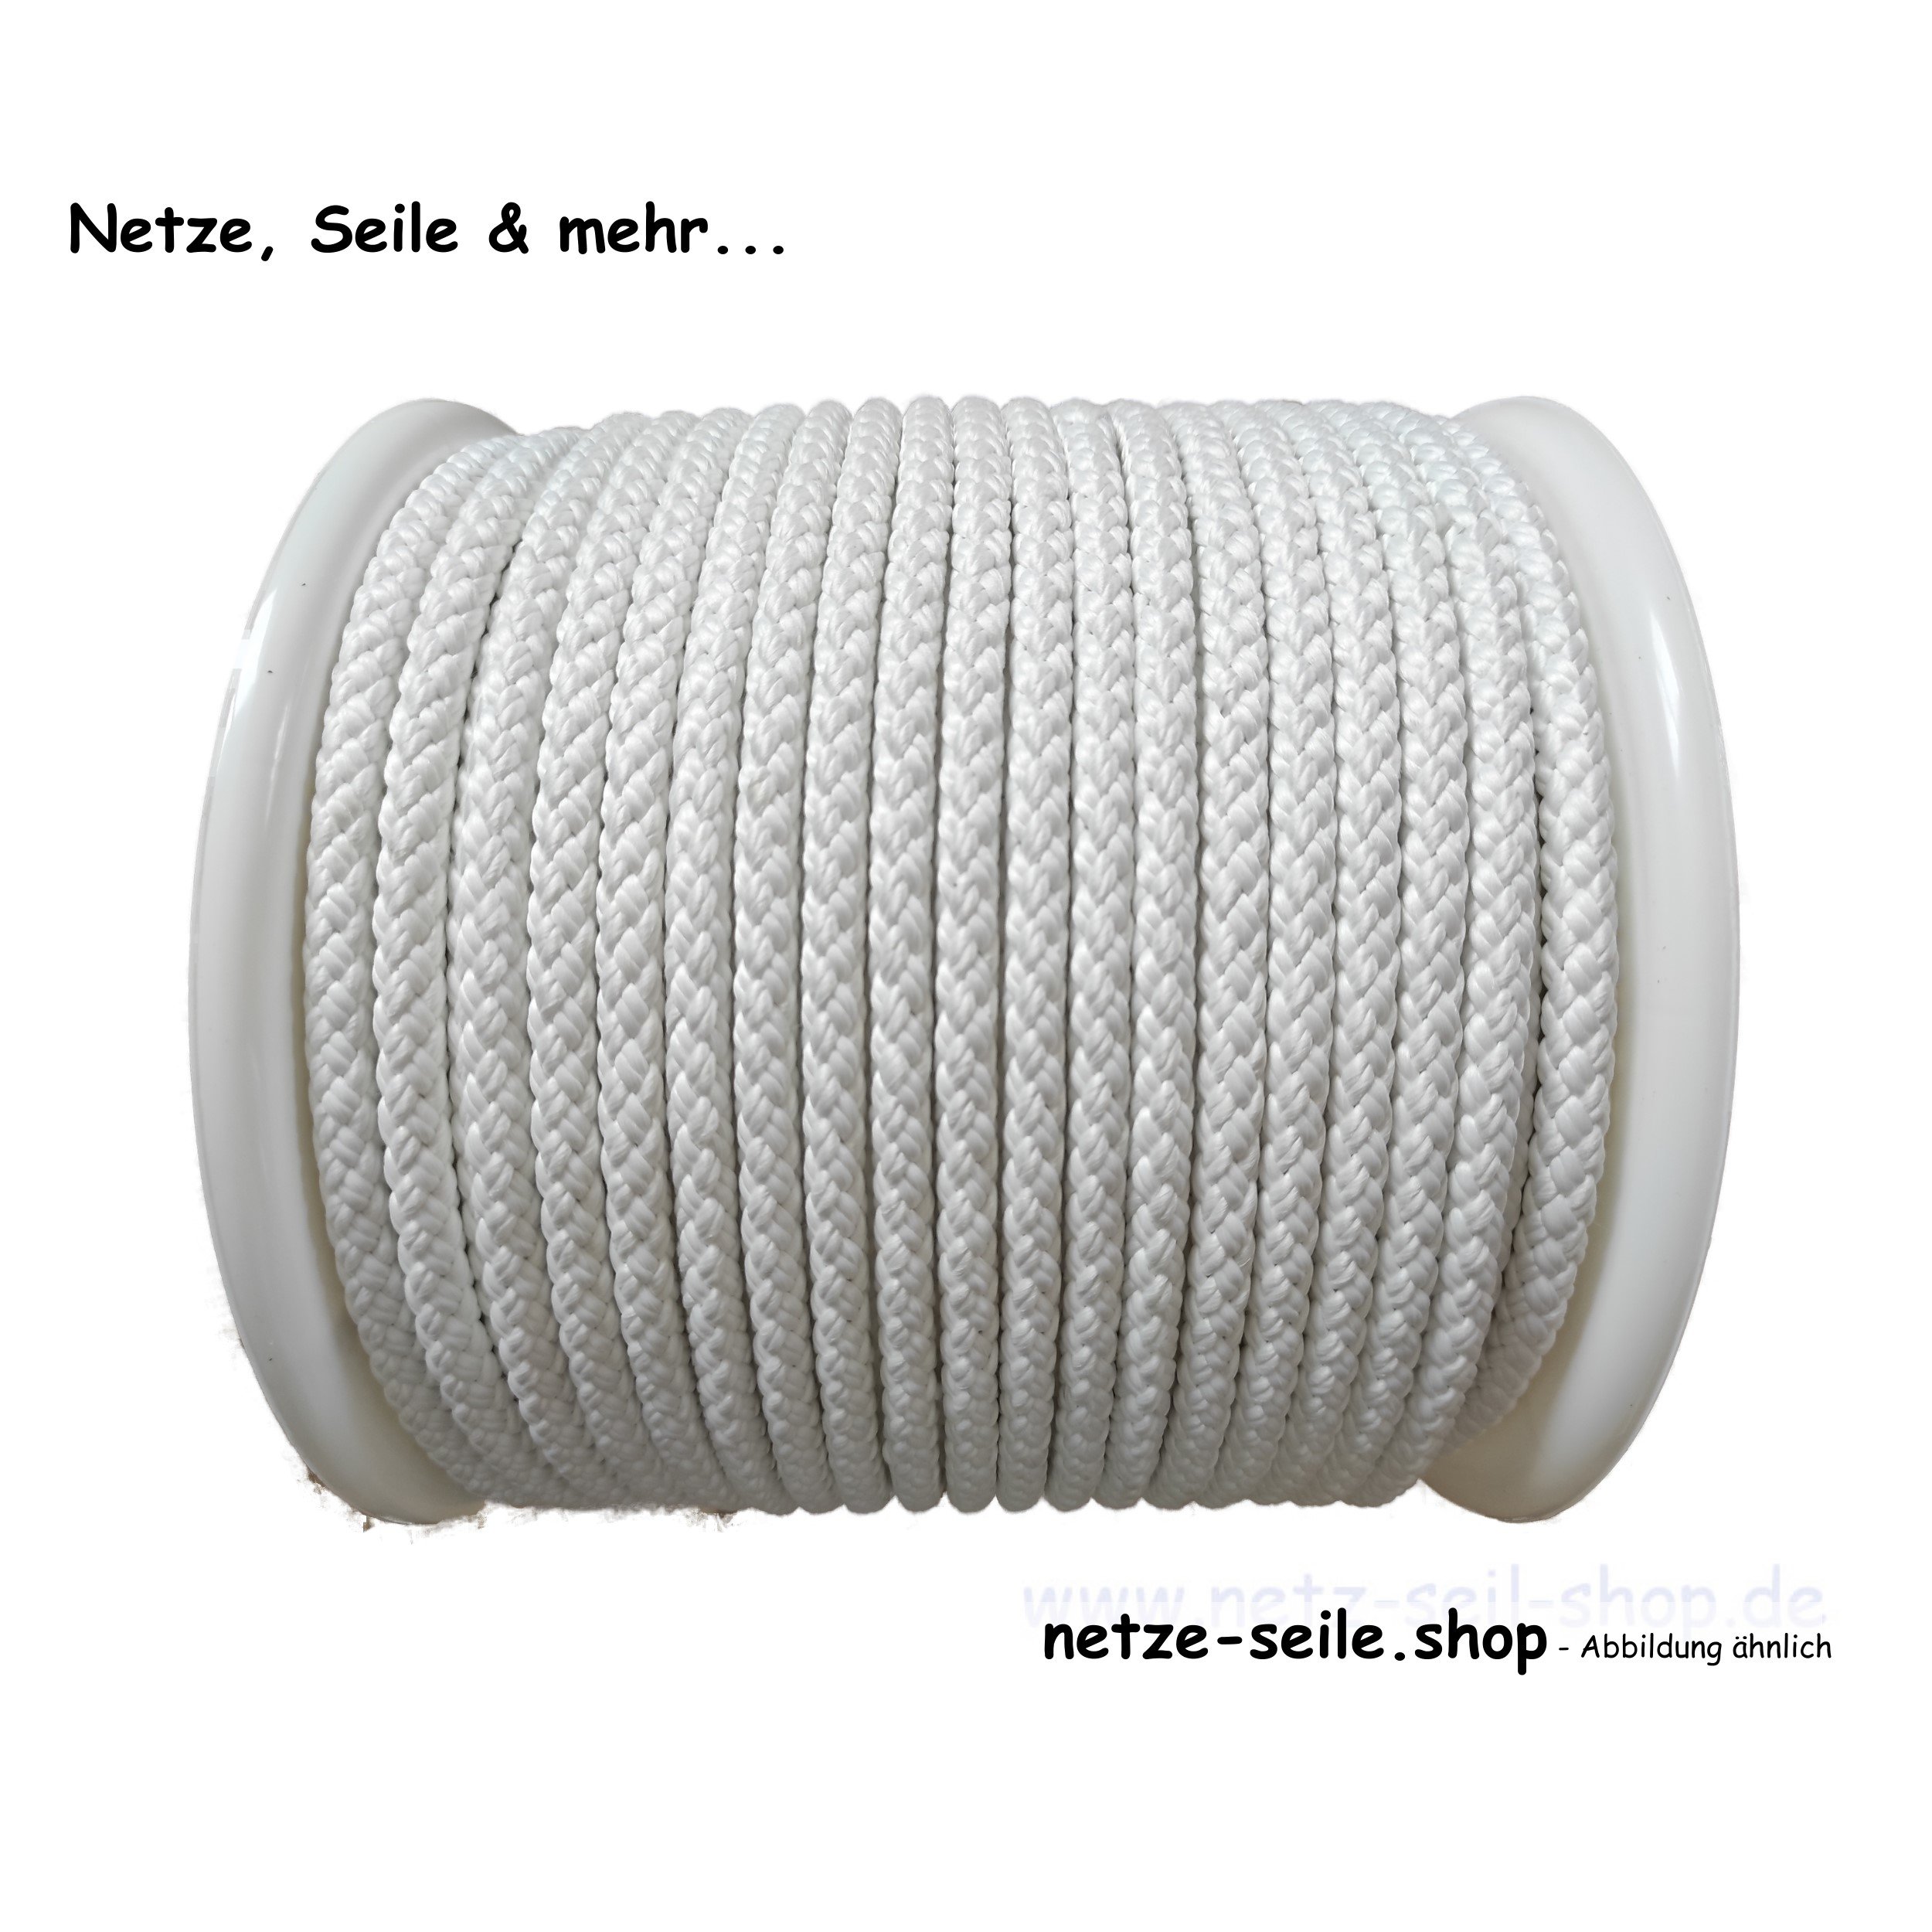 Nylon rope braided with core - Nets, ropes and more